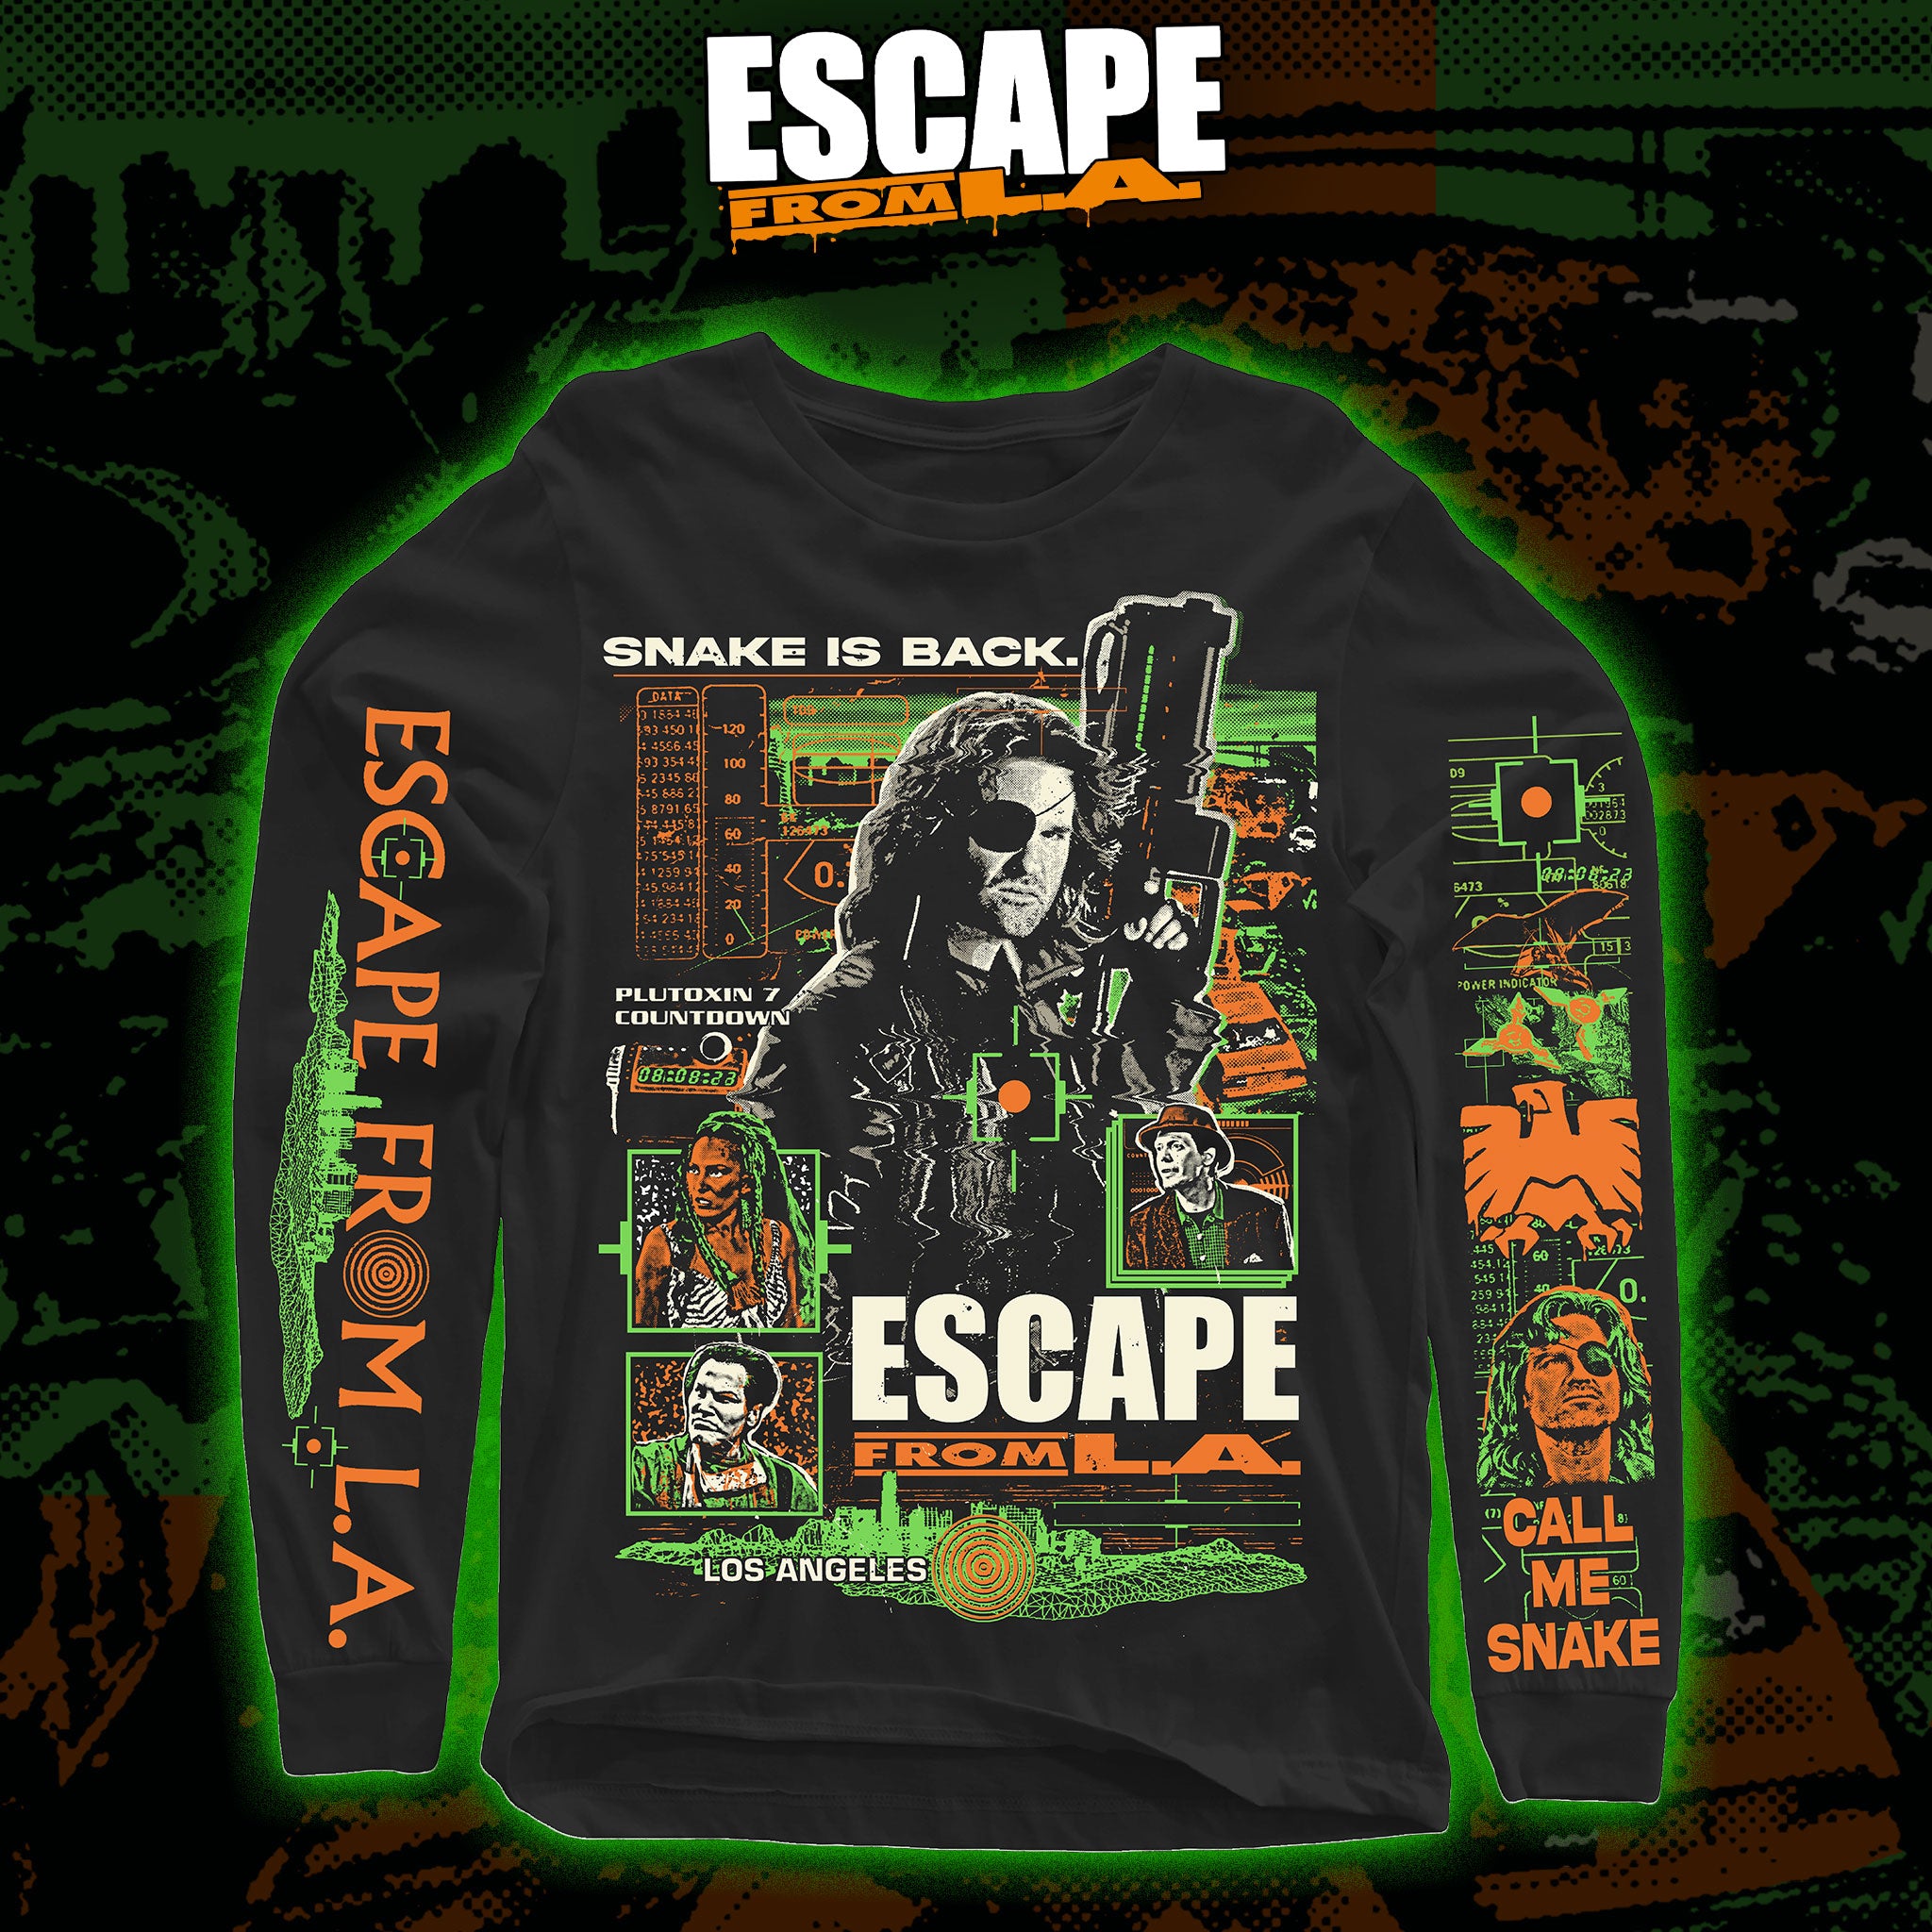 Escape from L.A. - Long sleeve